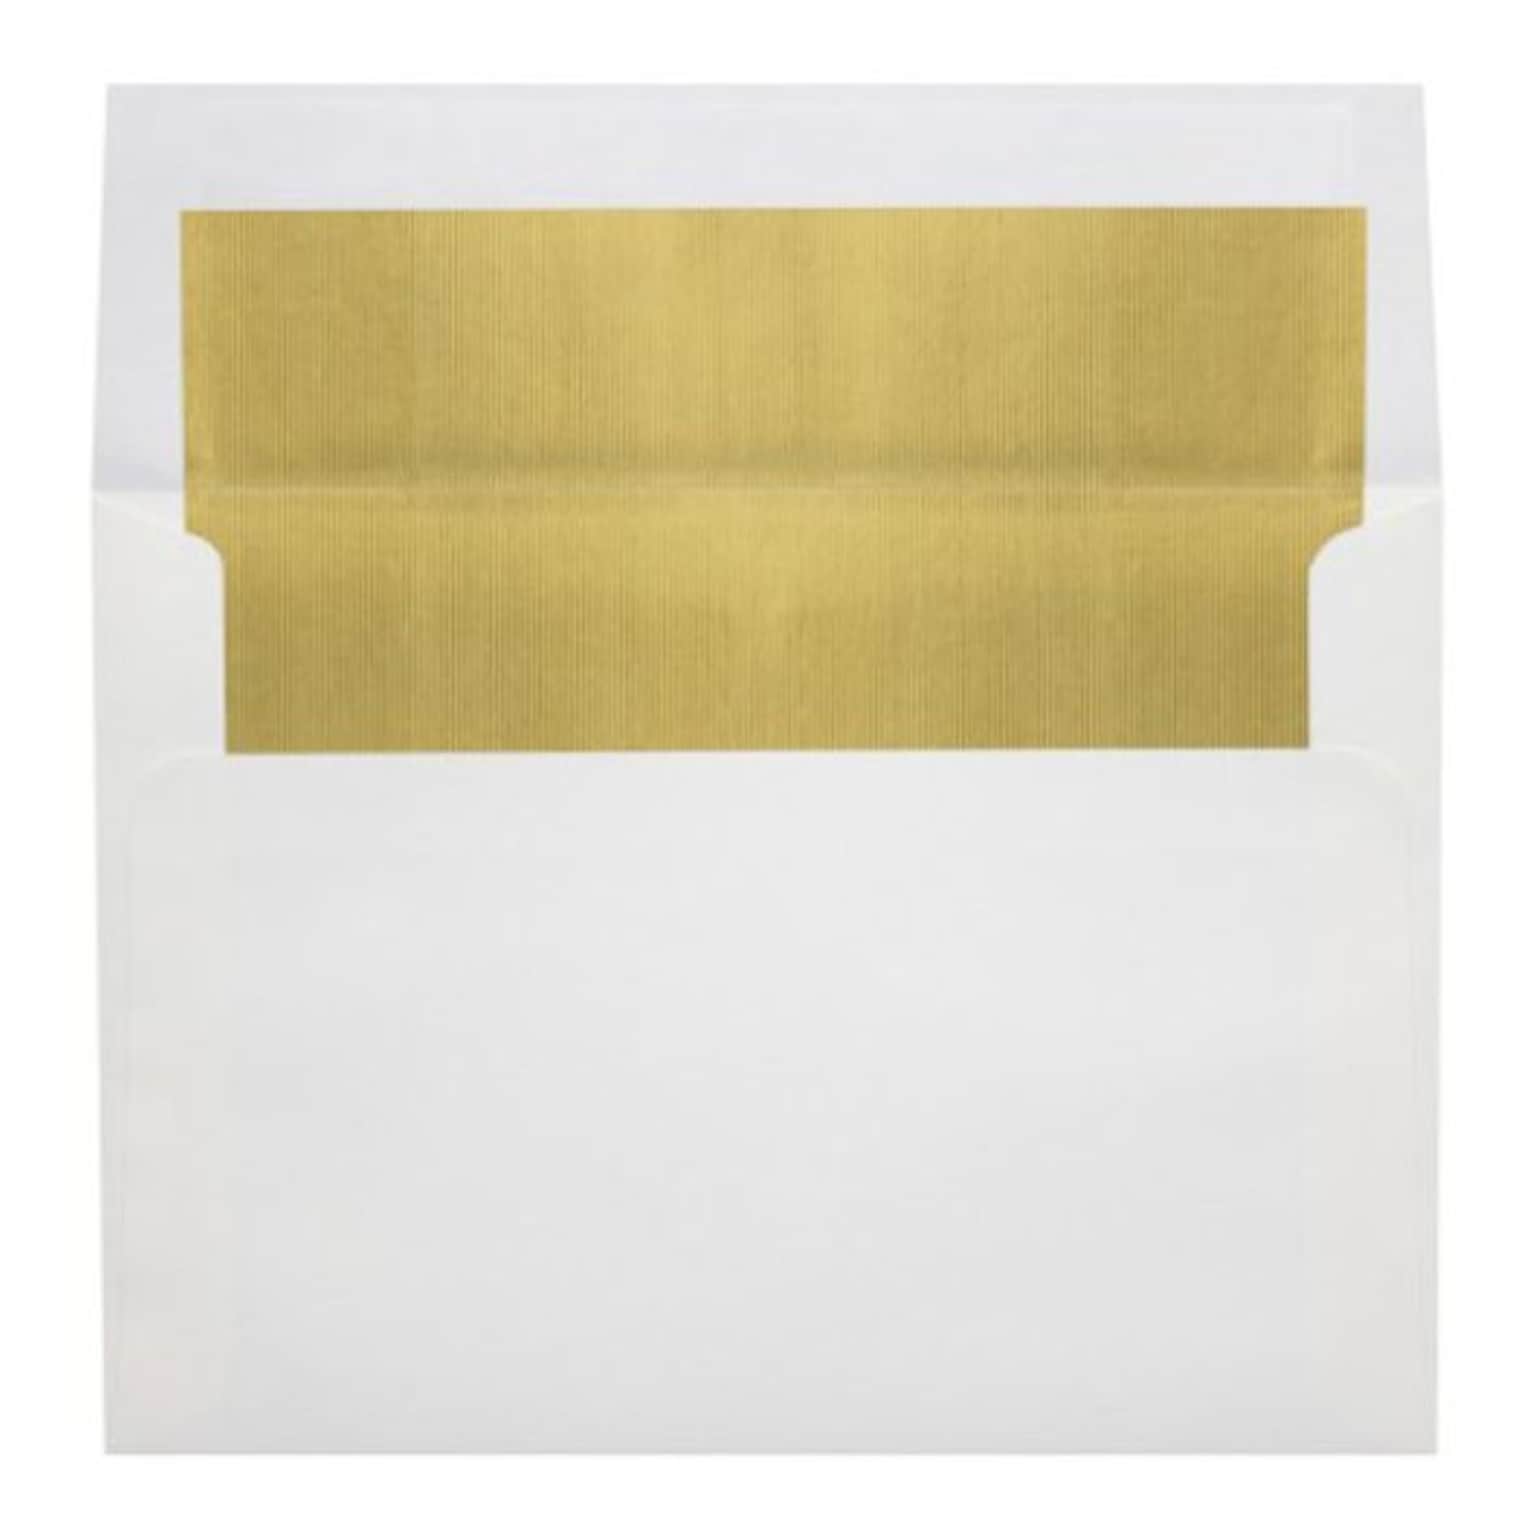 LUX A8 Foil Lined Invitation Envelopes (5 1/2 x 8 1/8) 500/Box, White w/Gold LUX Lining (FLWH4885-04-500)